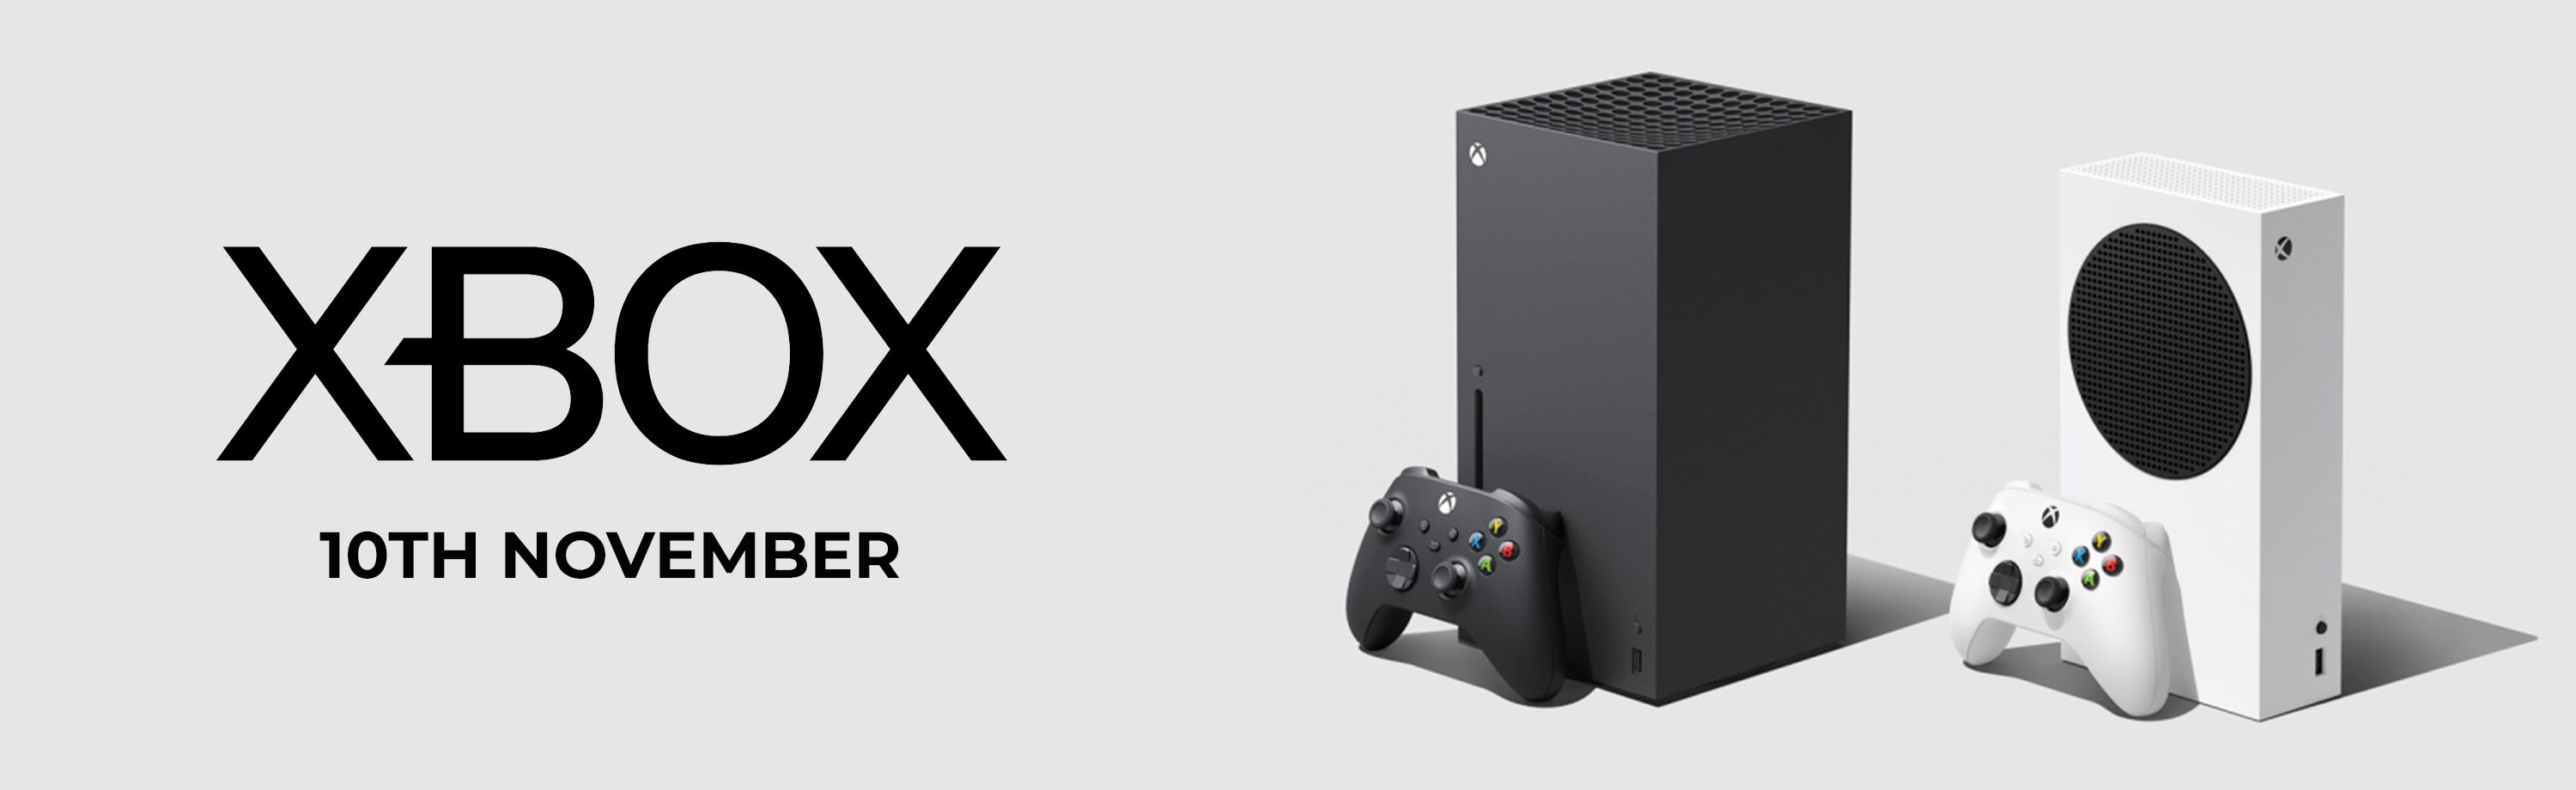 Xbox Series X and S release date